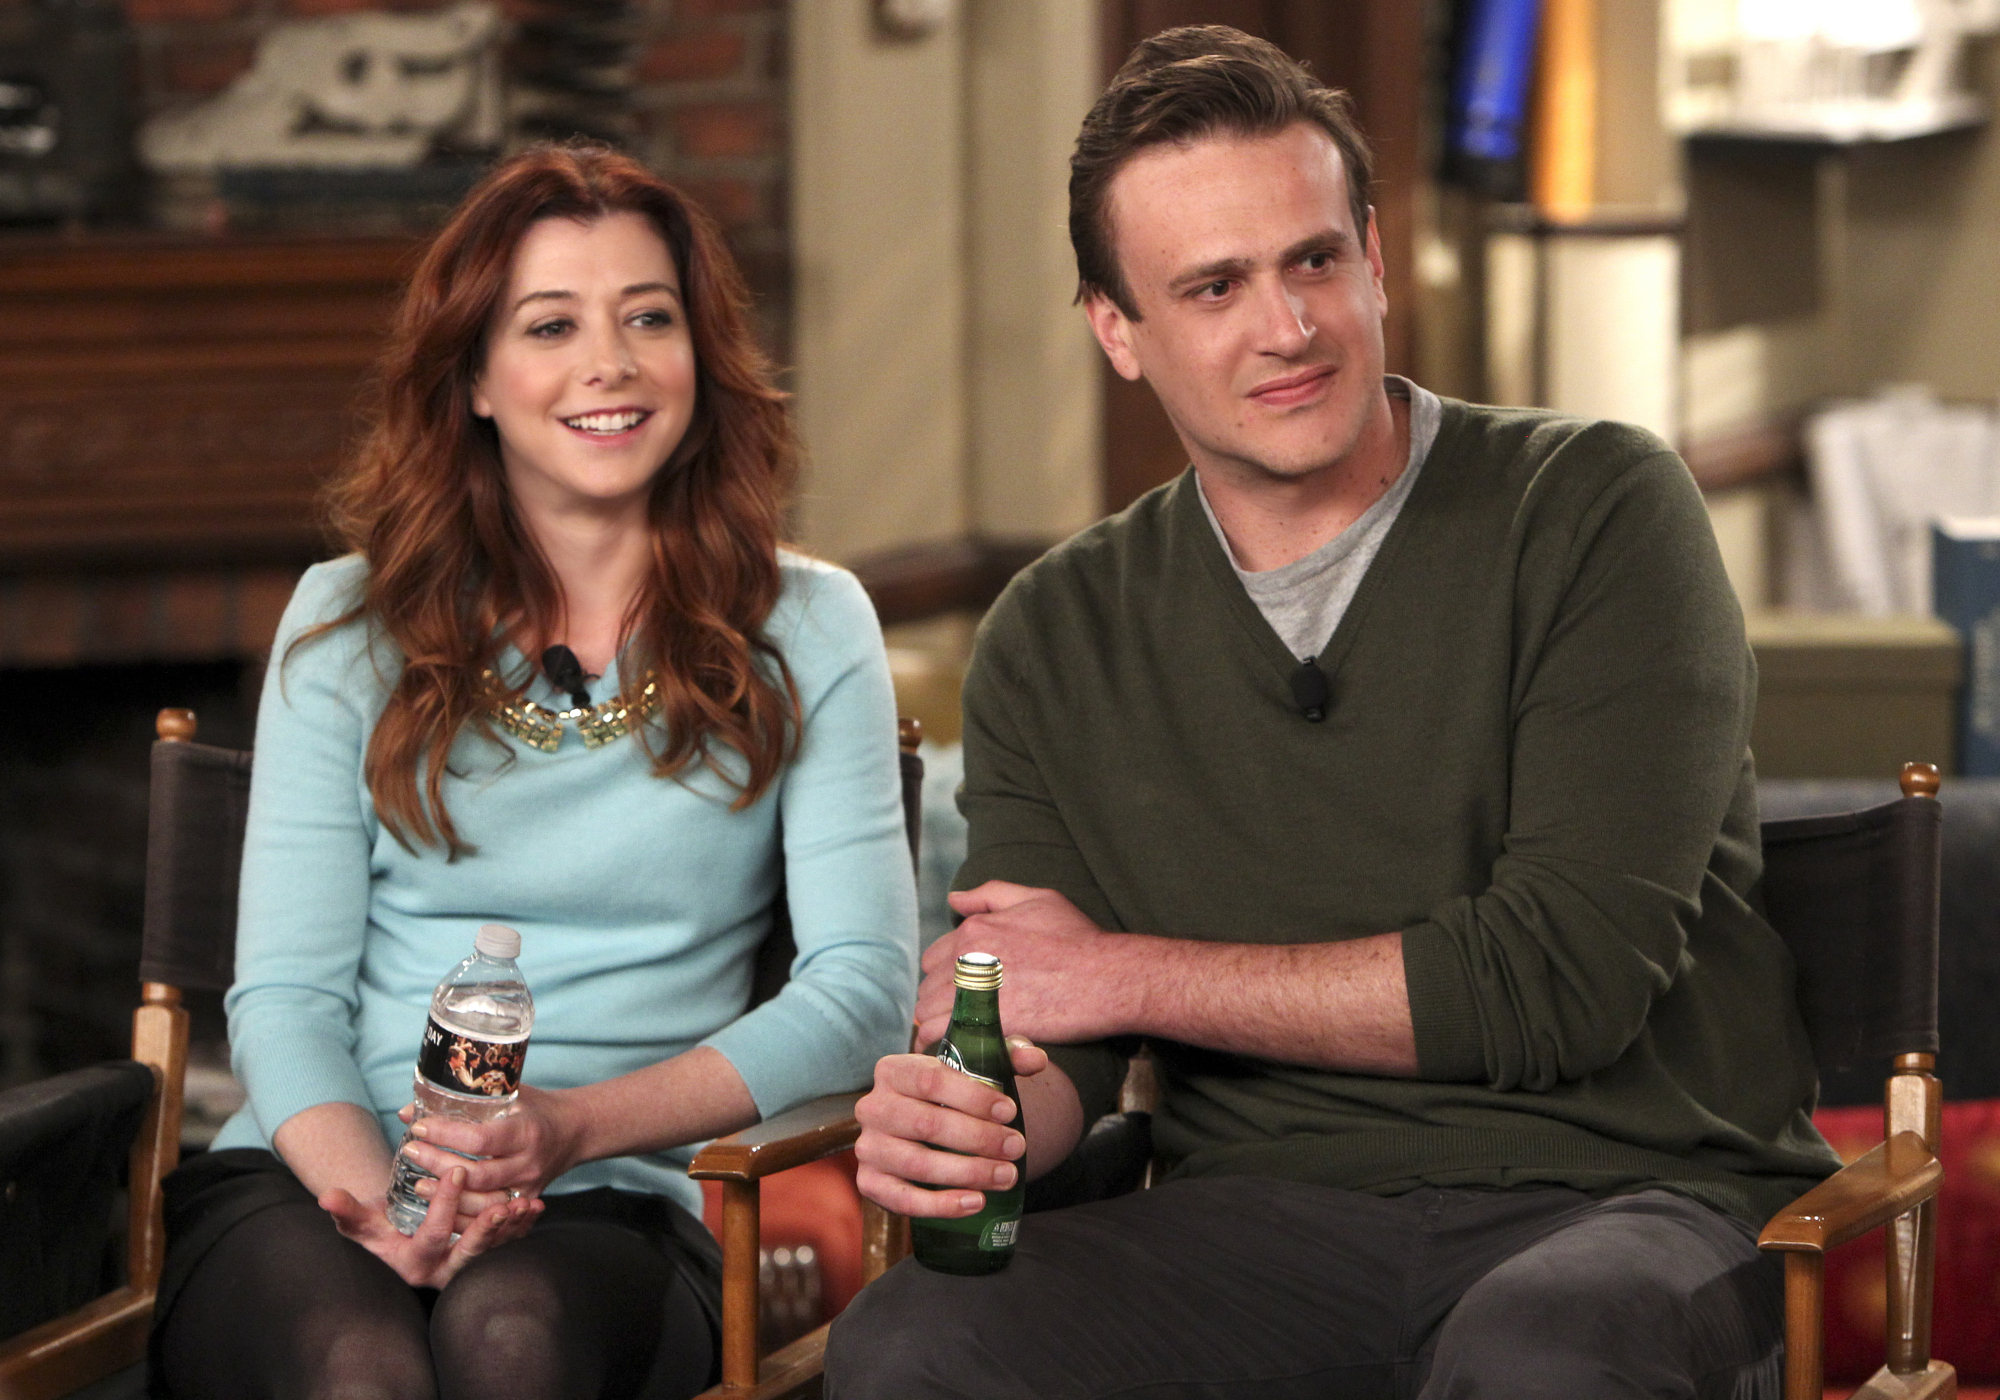 Lily and Marshall  sitting and smiling in a casual setting with water and a beer